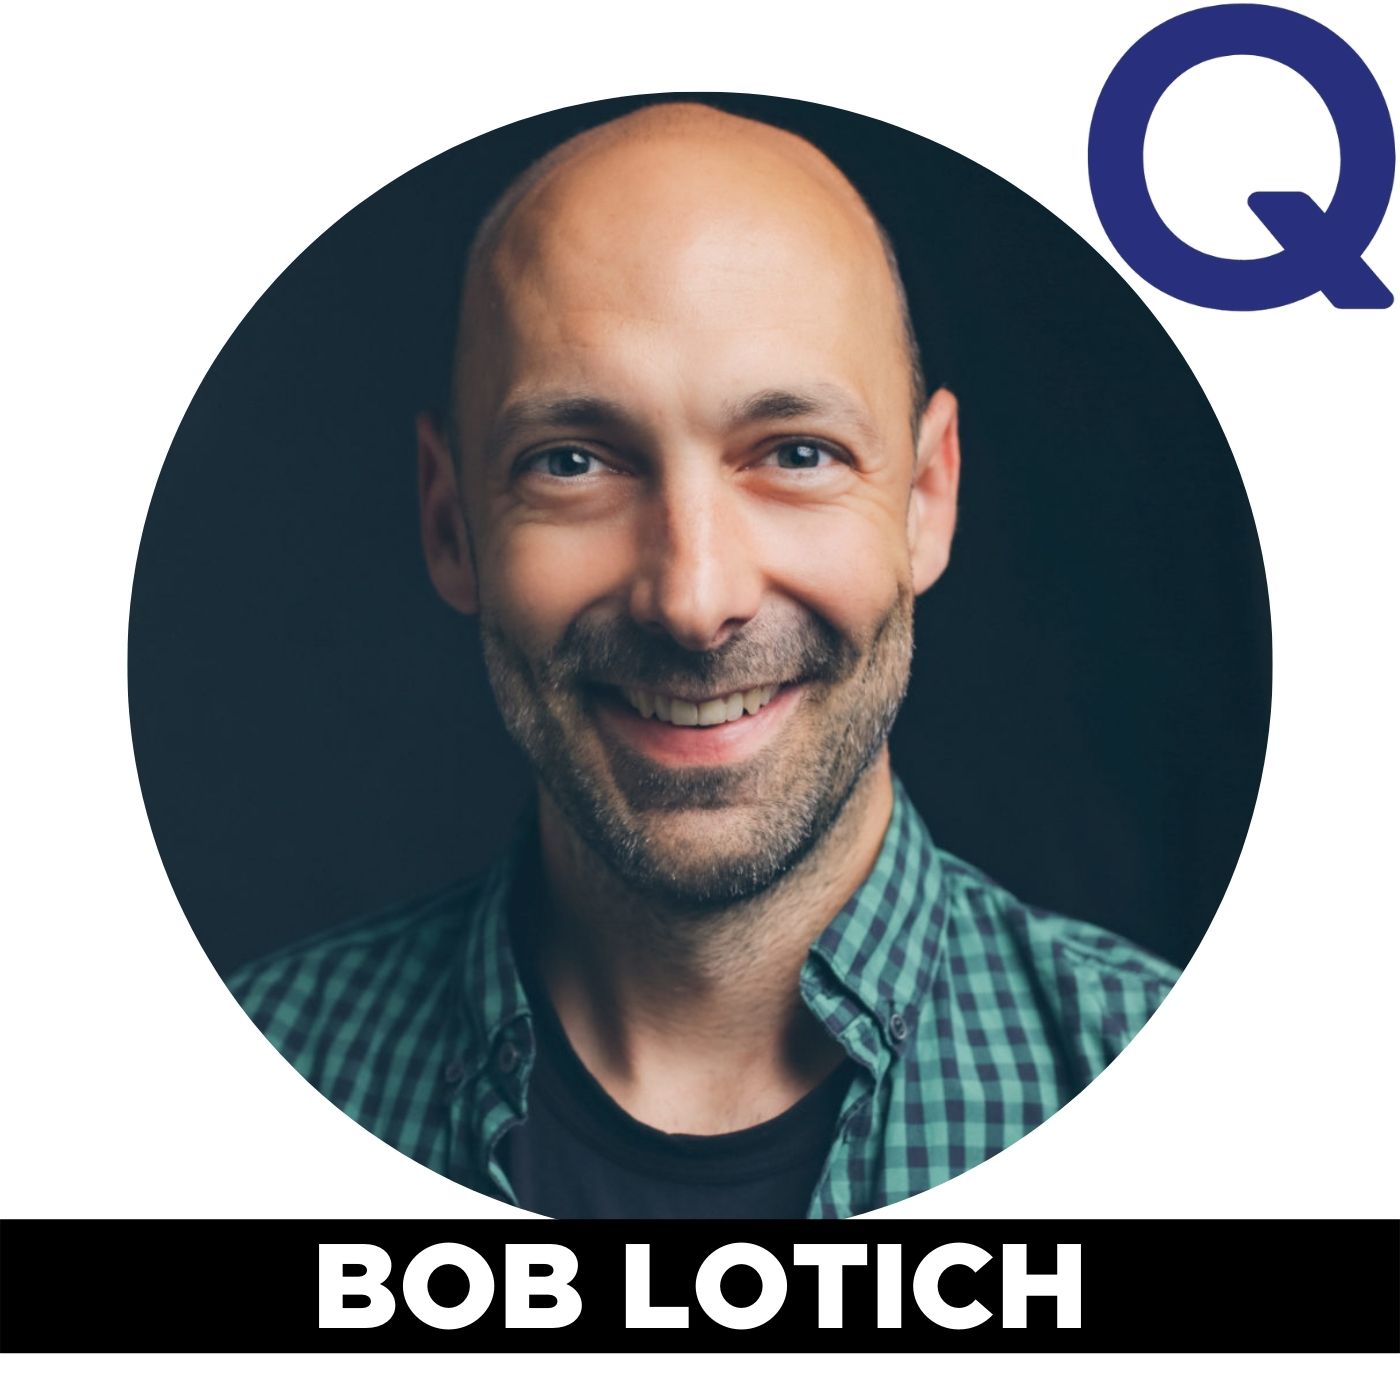 Make More, Save More, and Give More than Ever Before with Bob Lotich